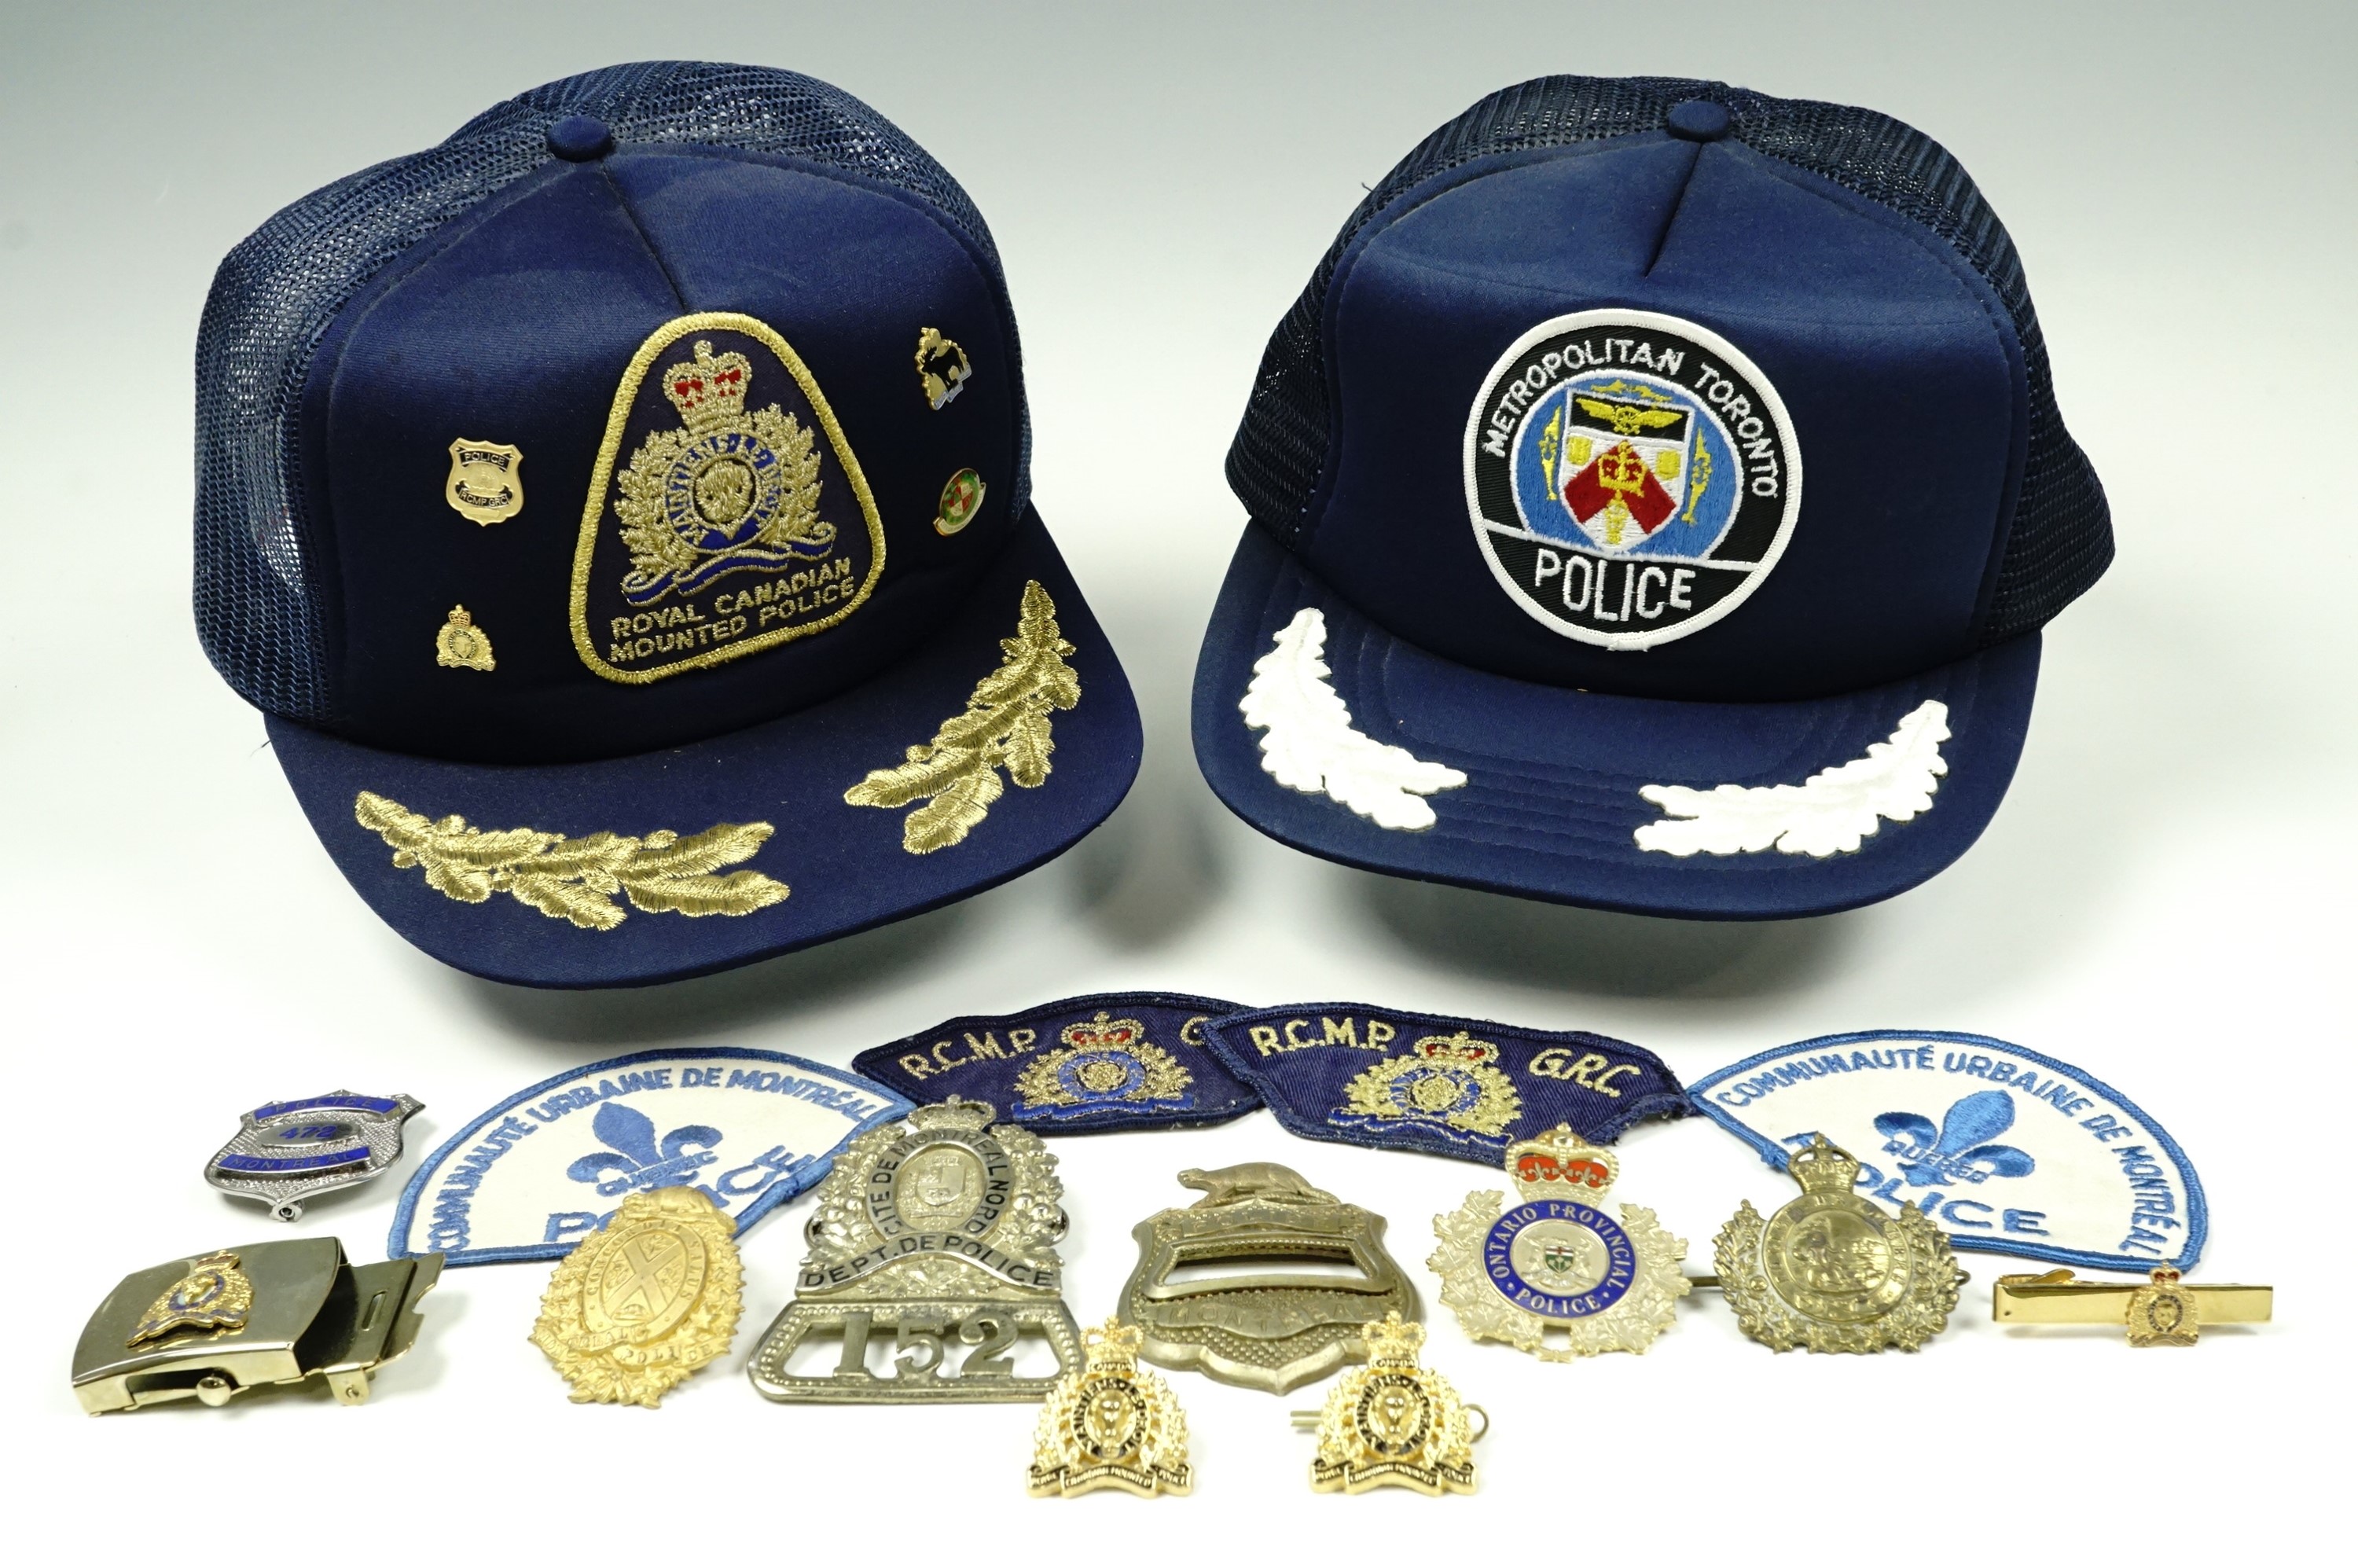 A collection of Canadian Police cap badges, comprising Montreal Police, Ontario Police, Royal